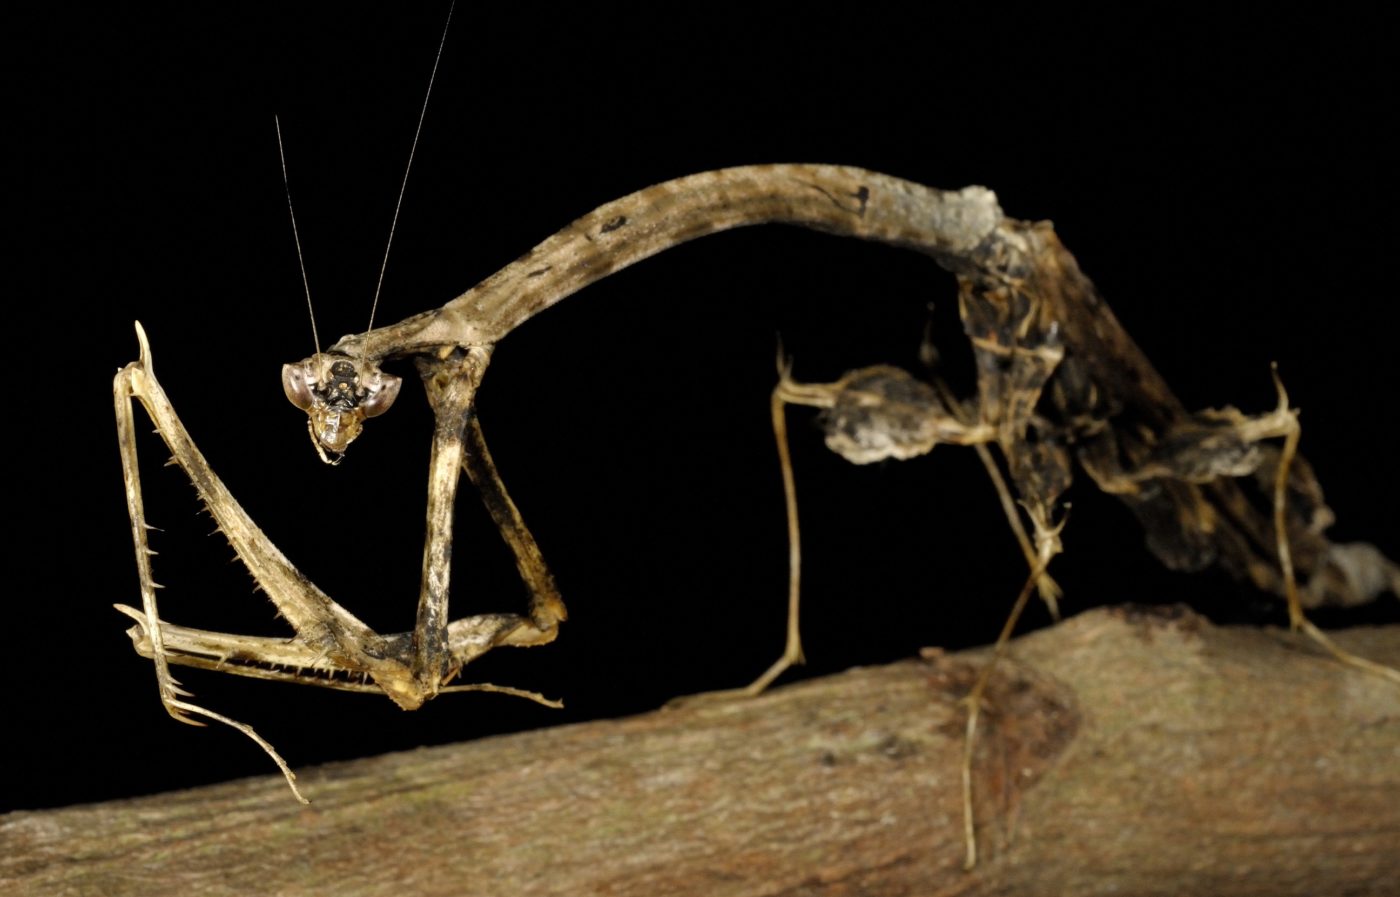 This male mantis, Toxodera maculata, was photographed in the rainforest in Borneo. Its rather menacing posture, combined with its long (5cm) curved thorax and the leaf-like projections on its legs and body make it a strange sight.